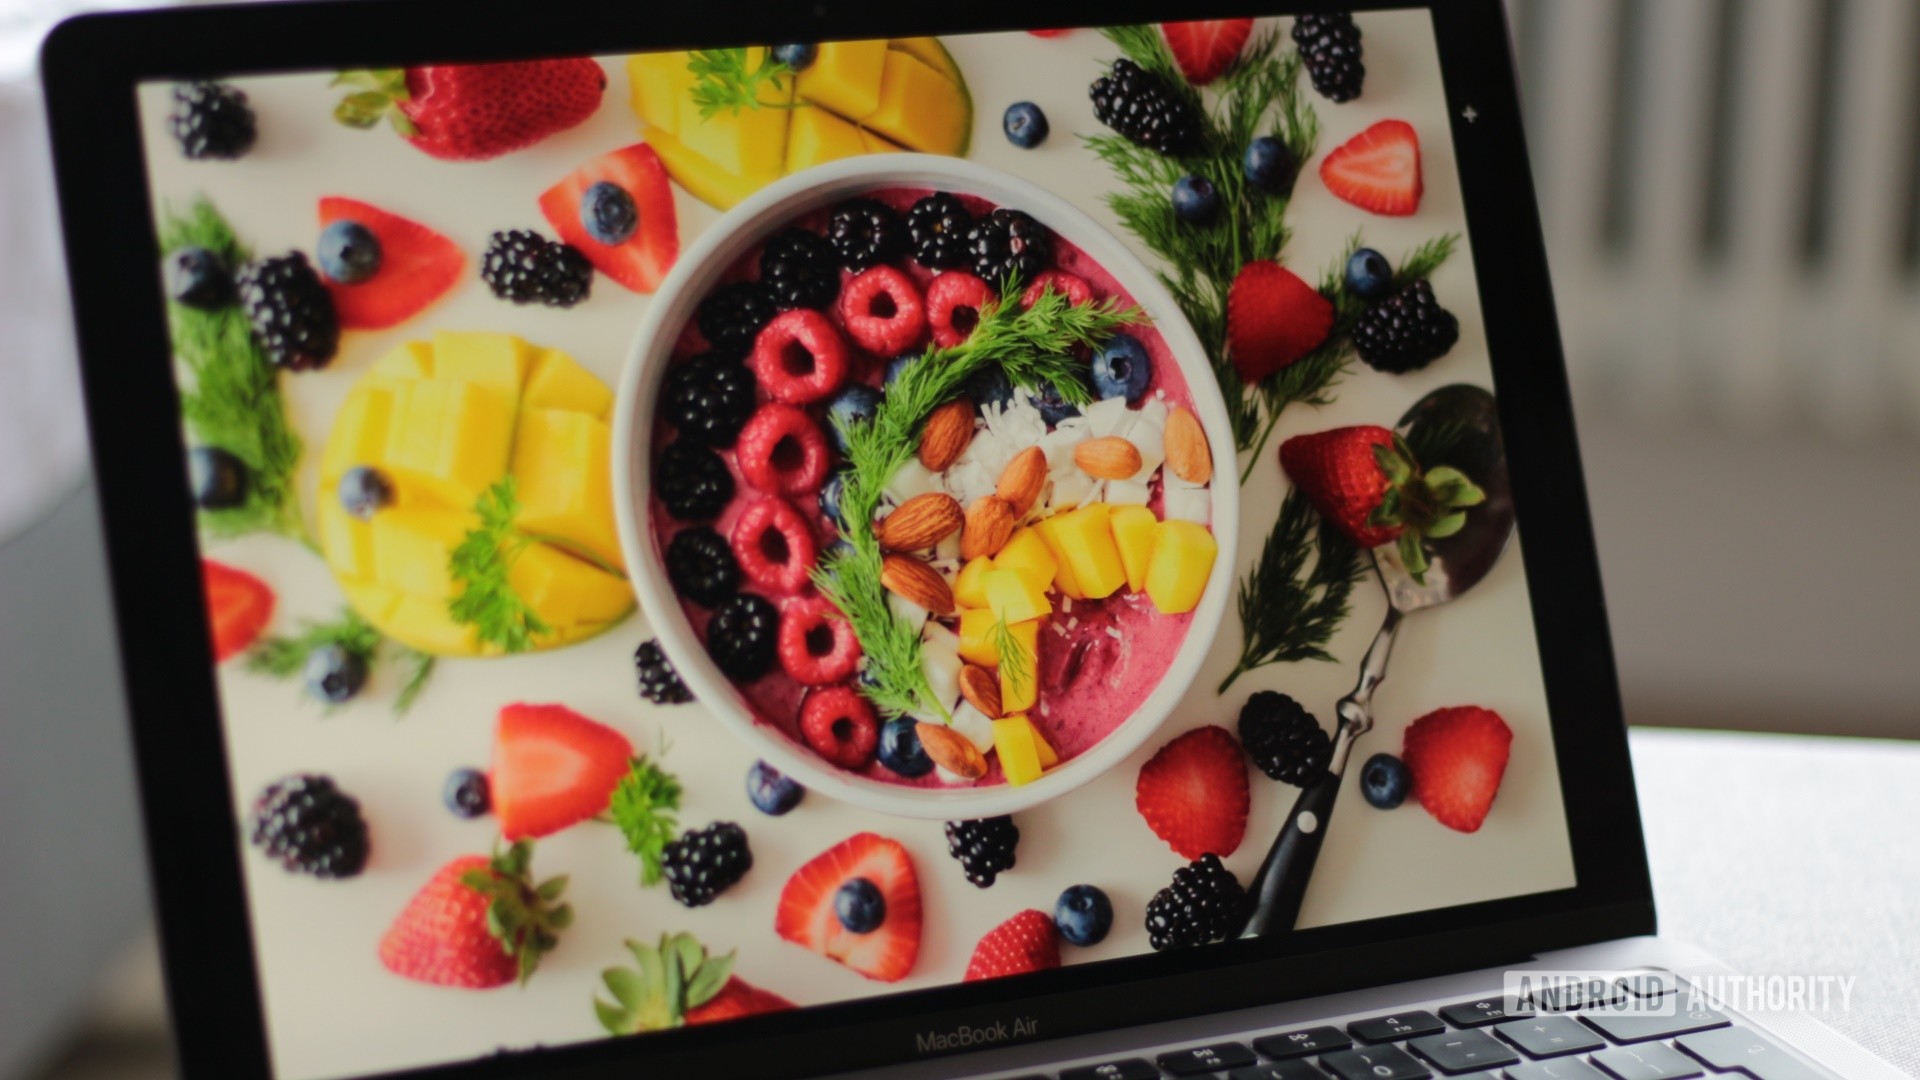 Apple MacBook Air M1 showing photos of fruits